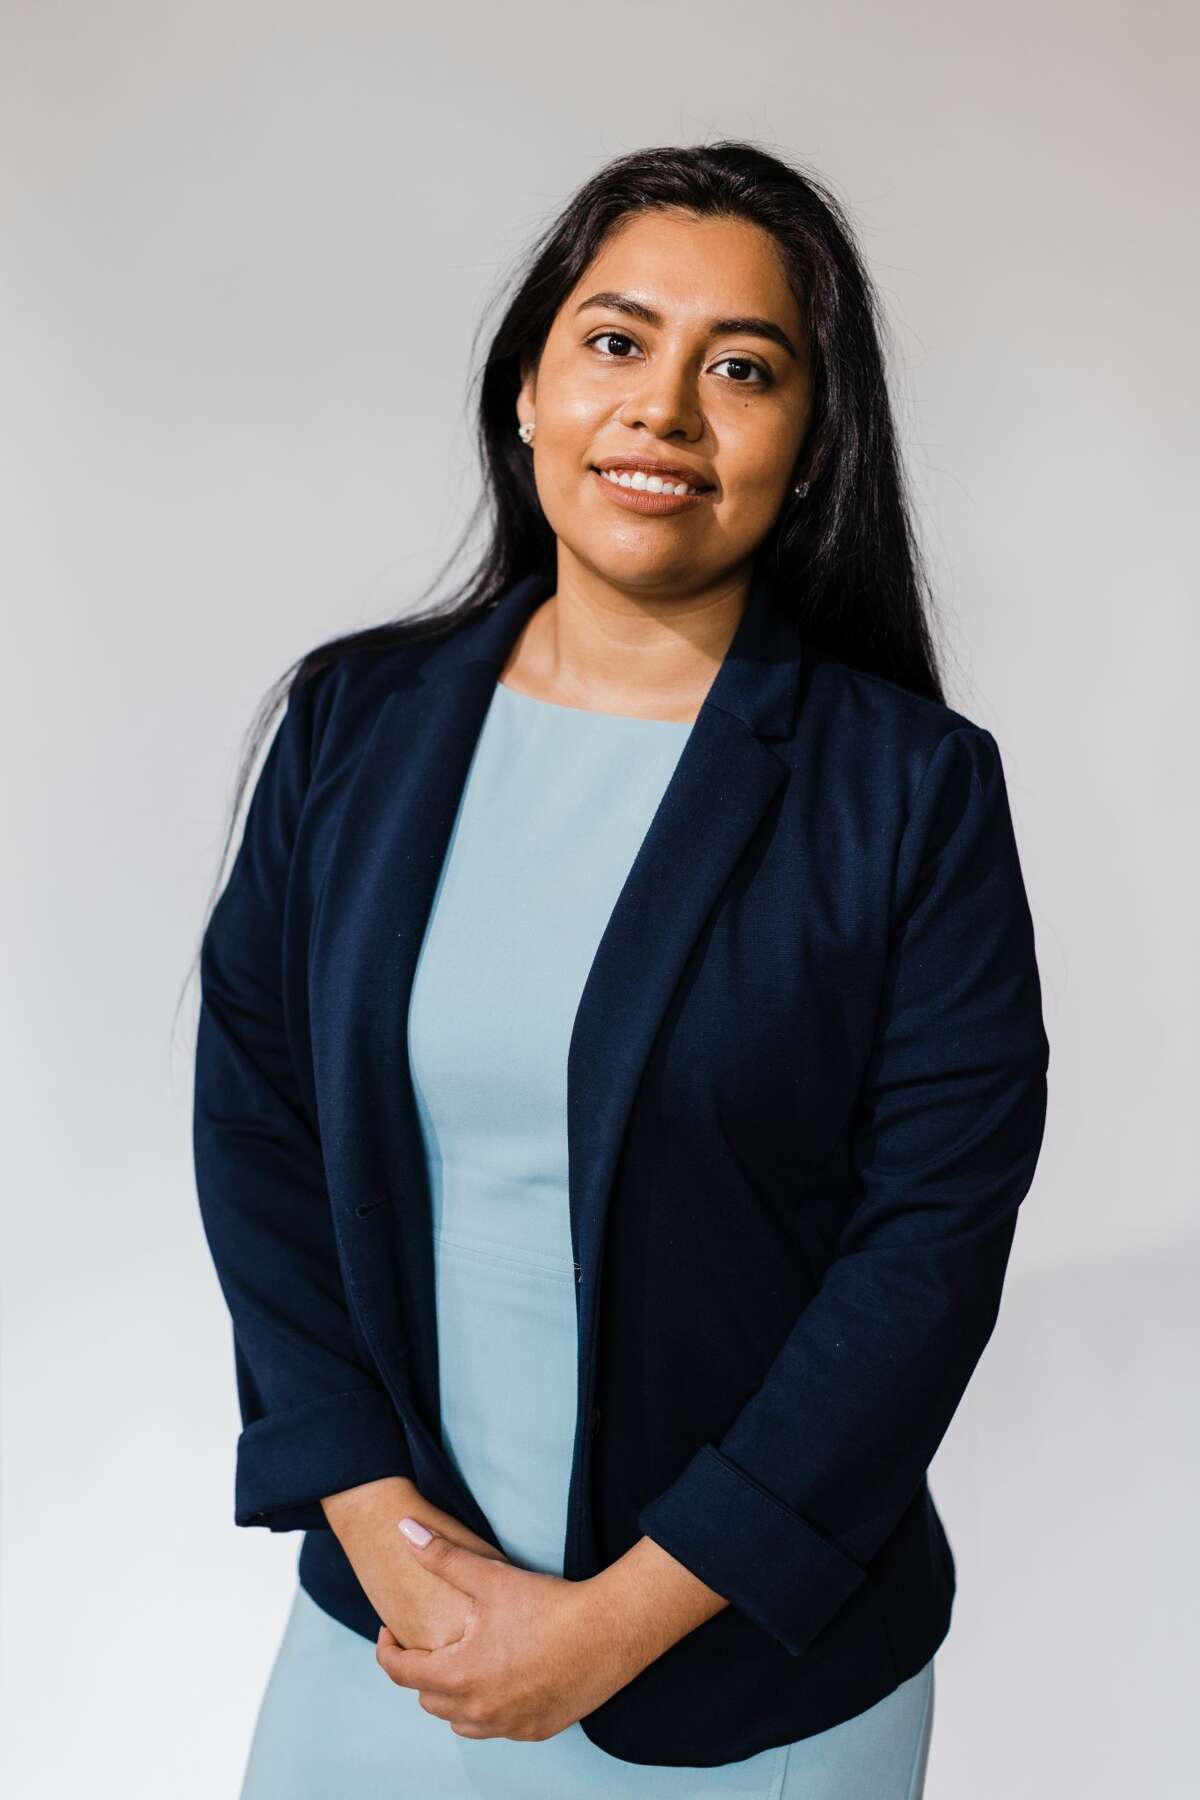 26-year-old Laredoan Jessica Cisneros has announced her bid for Congress. She will compete against long-time incumbent Henry Cuellar in the Democratic primaries. Click through the gallery to learn more about Cisneros.